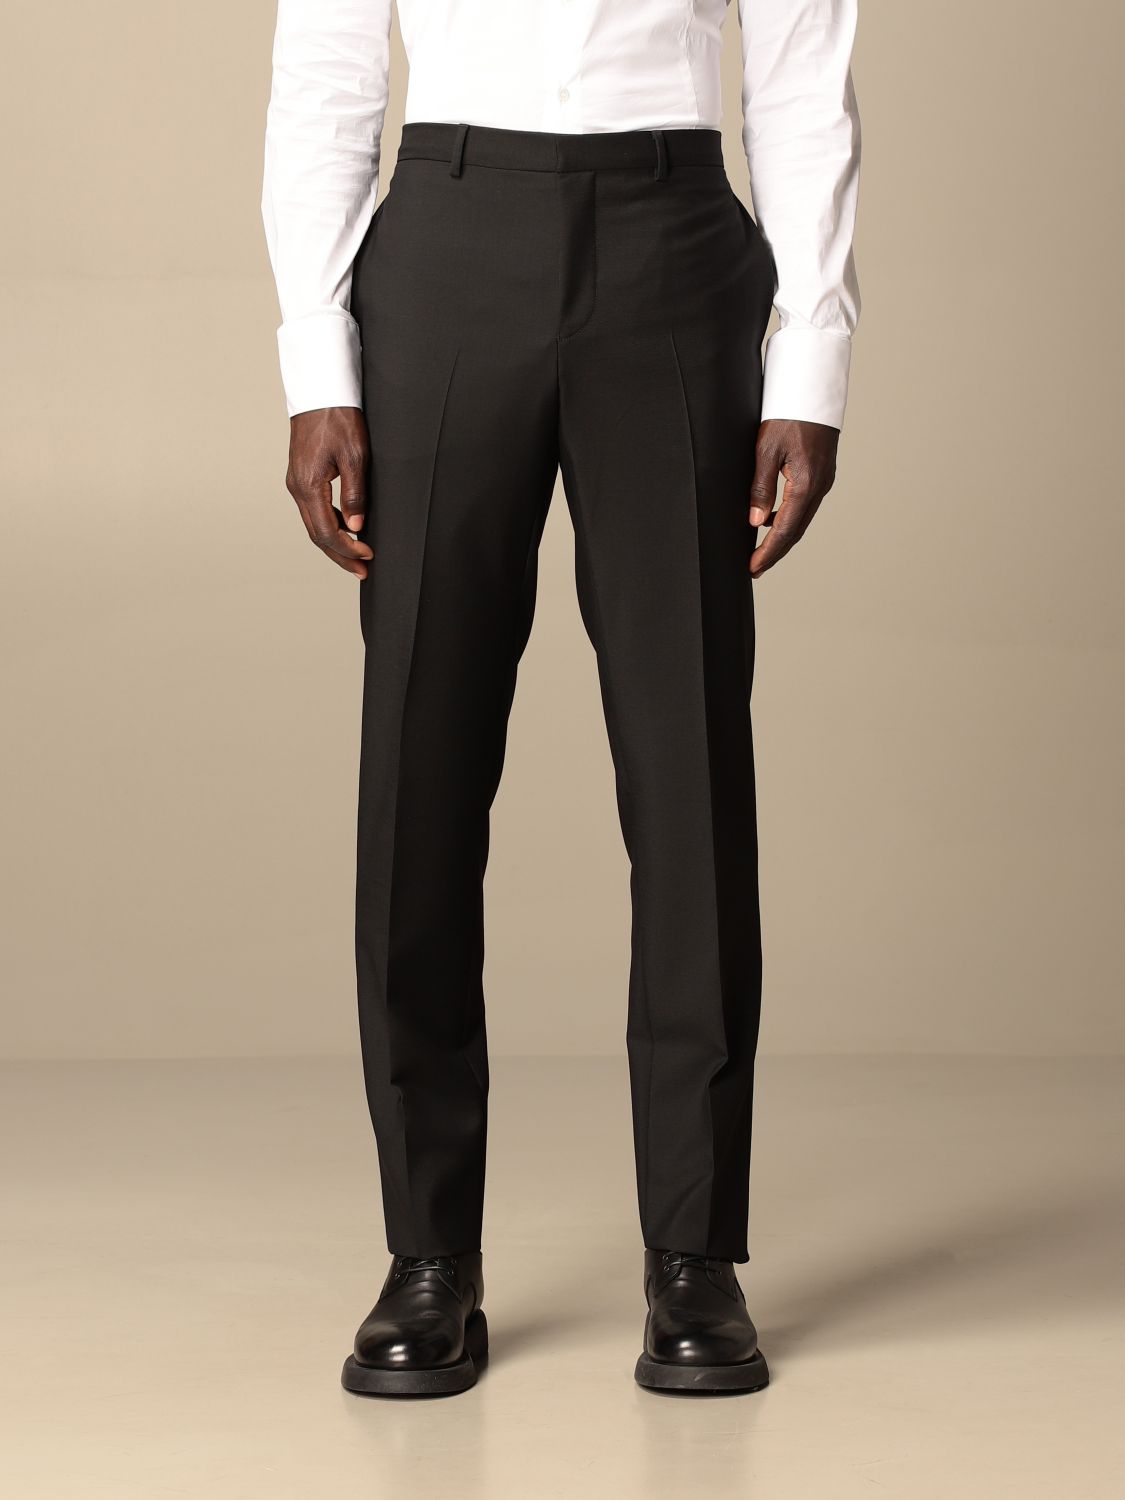 GIVENCHY: Classic single-breasted suit | Suit Givenchy Men Black | Suit ...